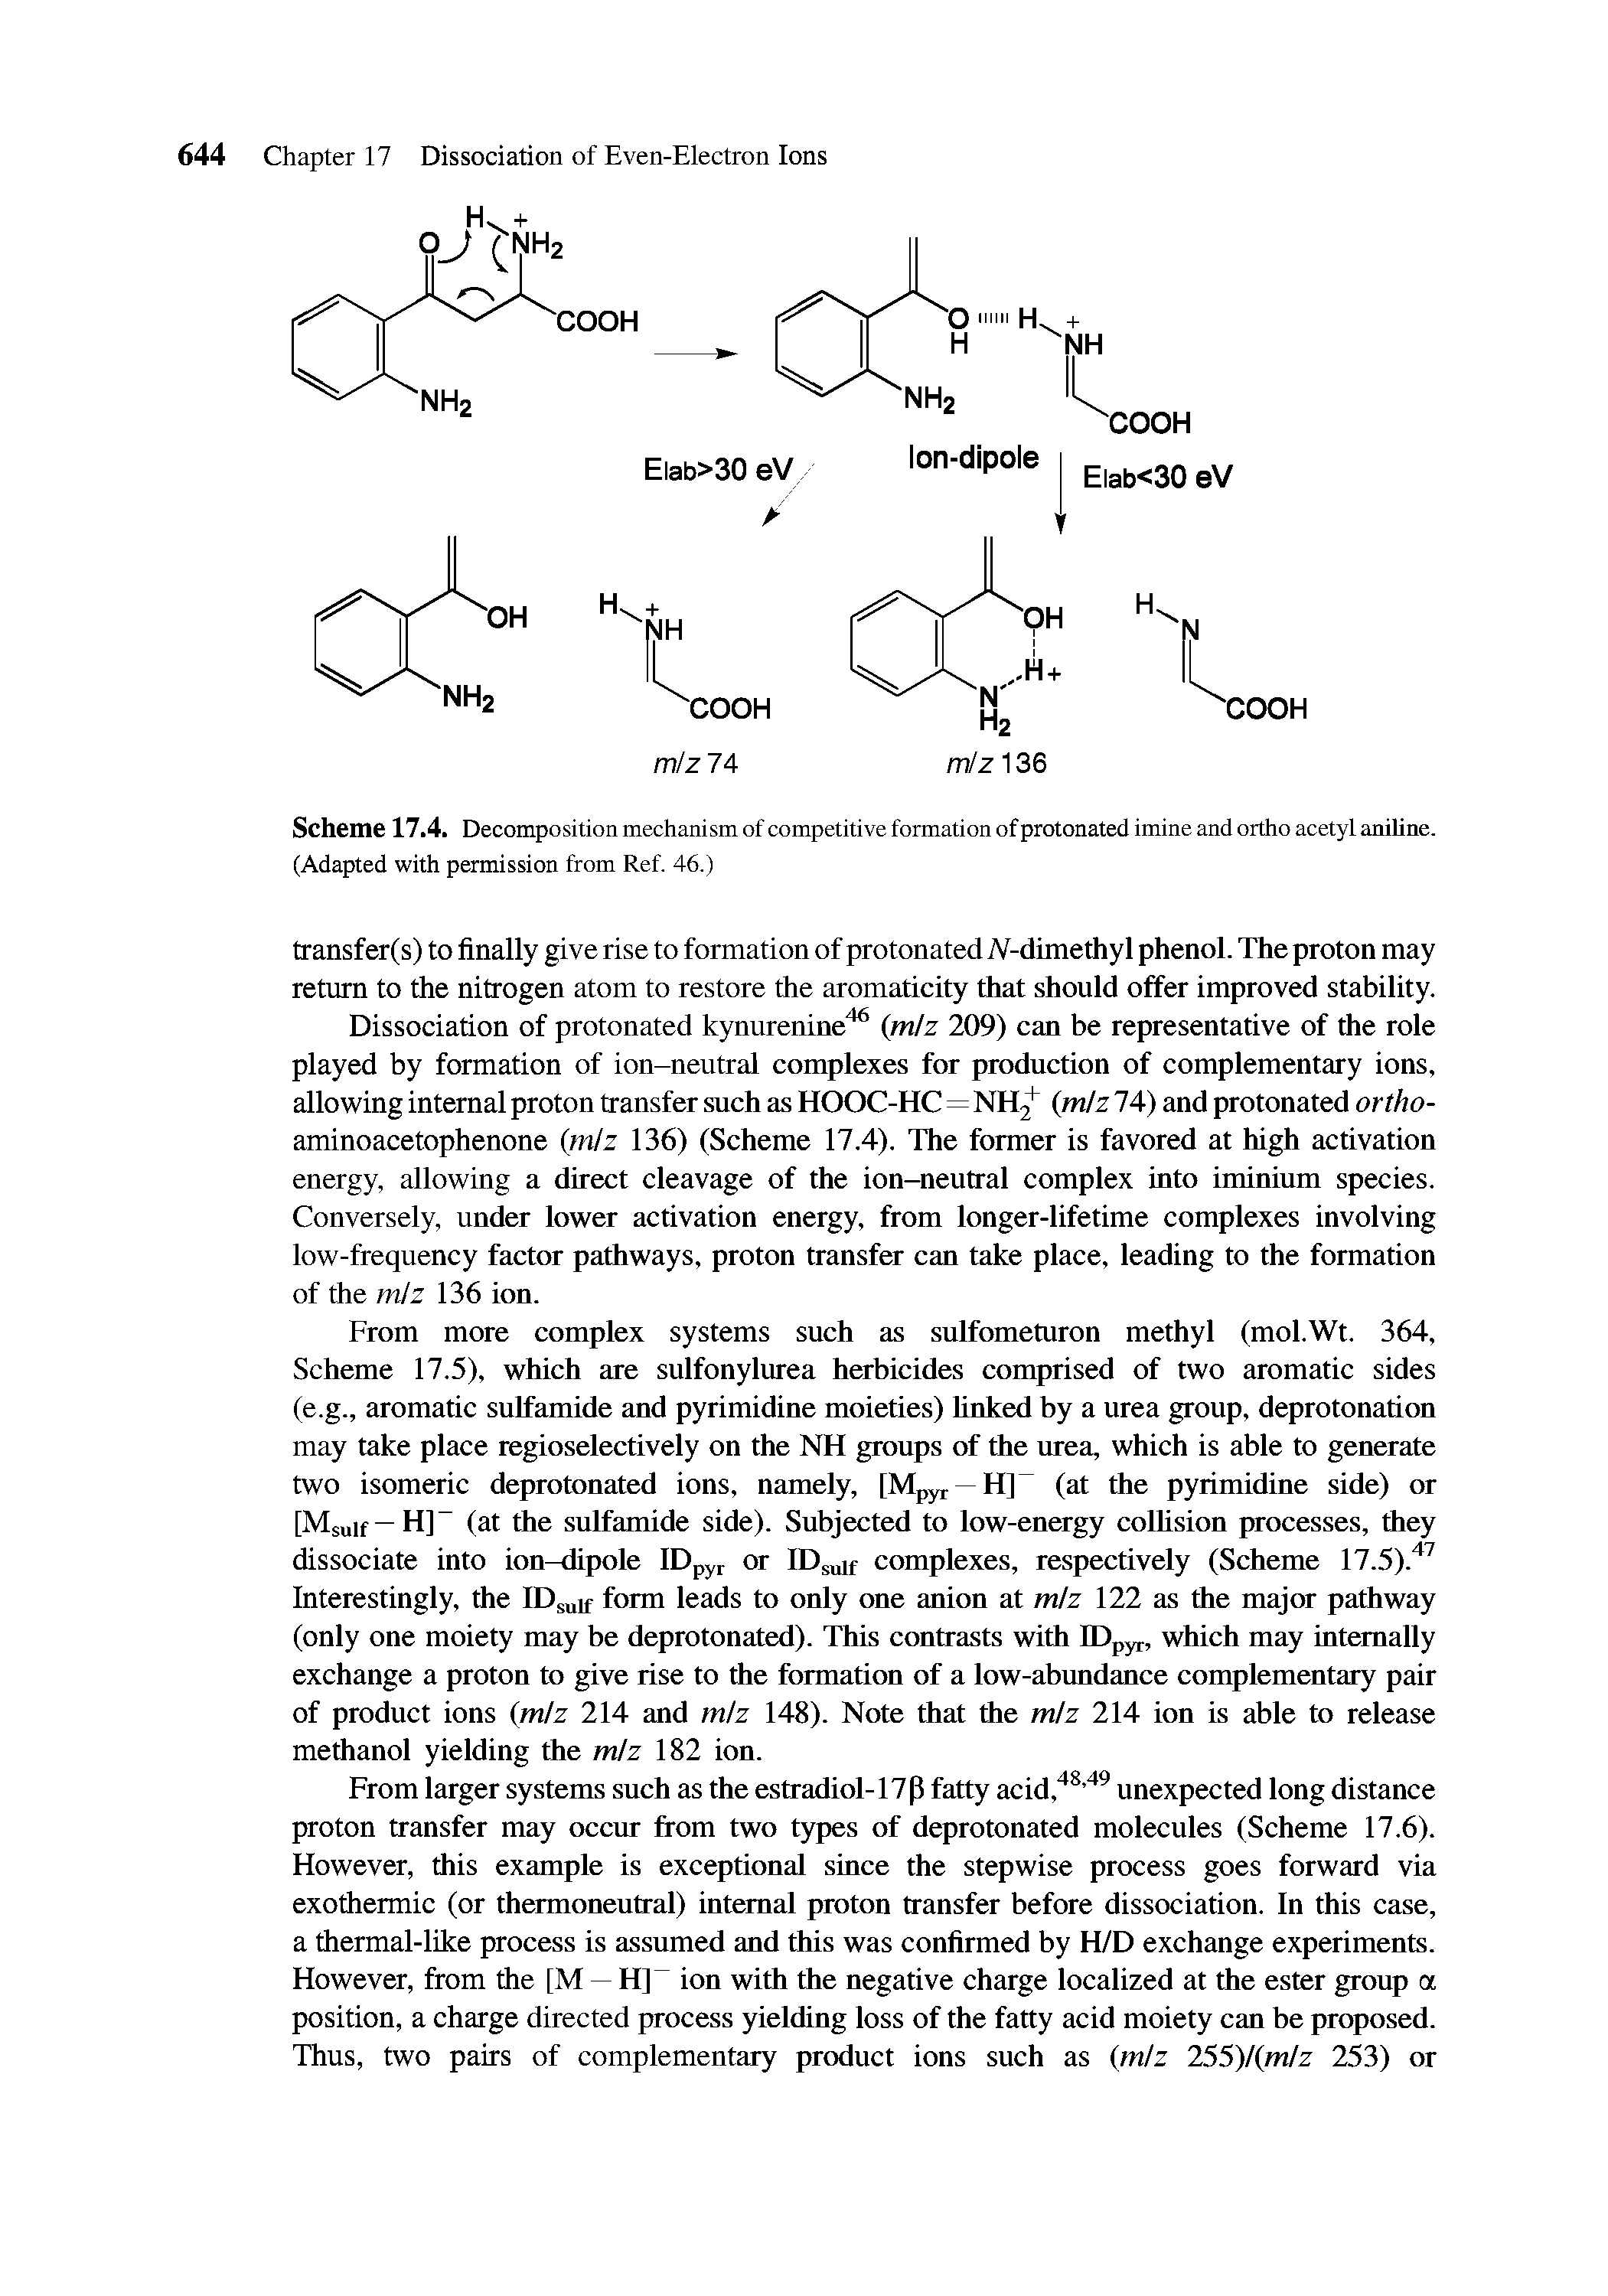 Scheme 17.4. Decomposition mechanism of competitive formation ofpiotonated imine and ortho acetyl aniline. (Adapted with permission from Ref. 46.)...